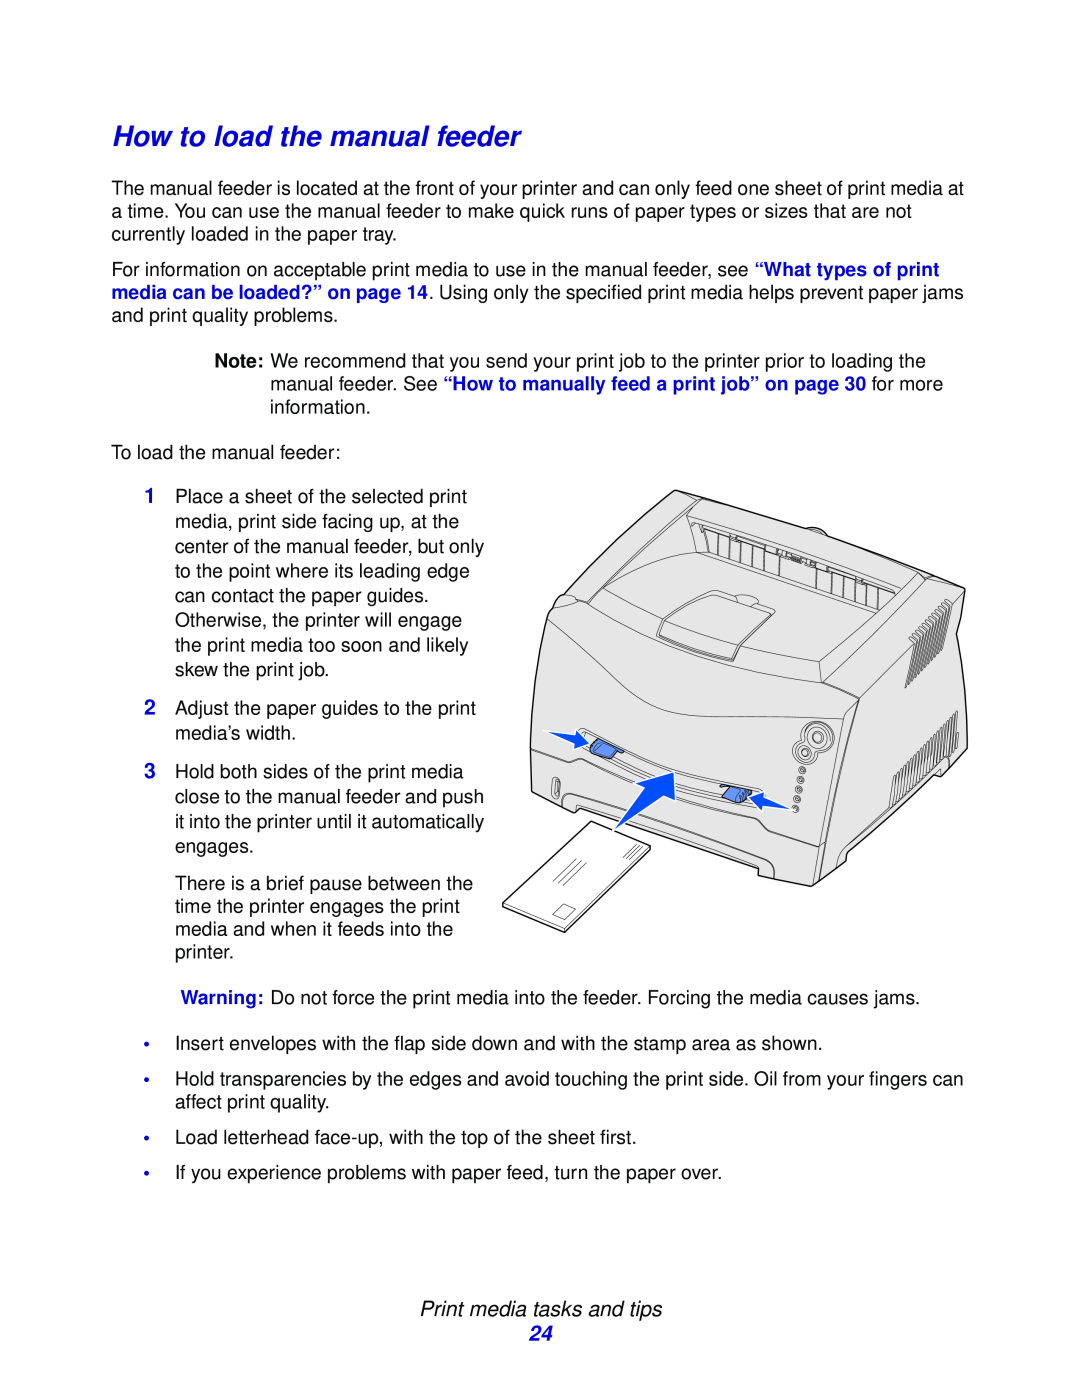 Lexmark 232, E332n, 230 How to load the manual feeder, Print media tasks and tips 